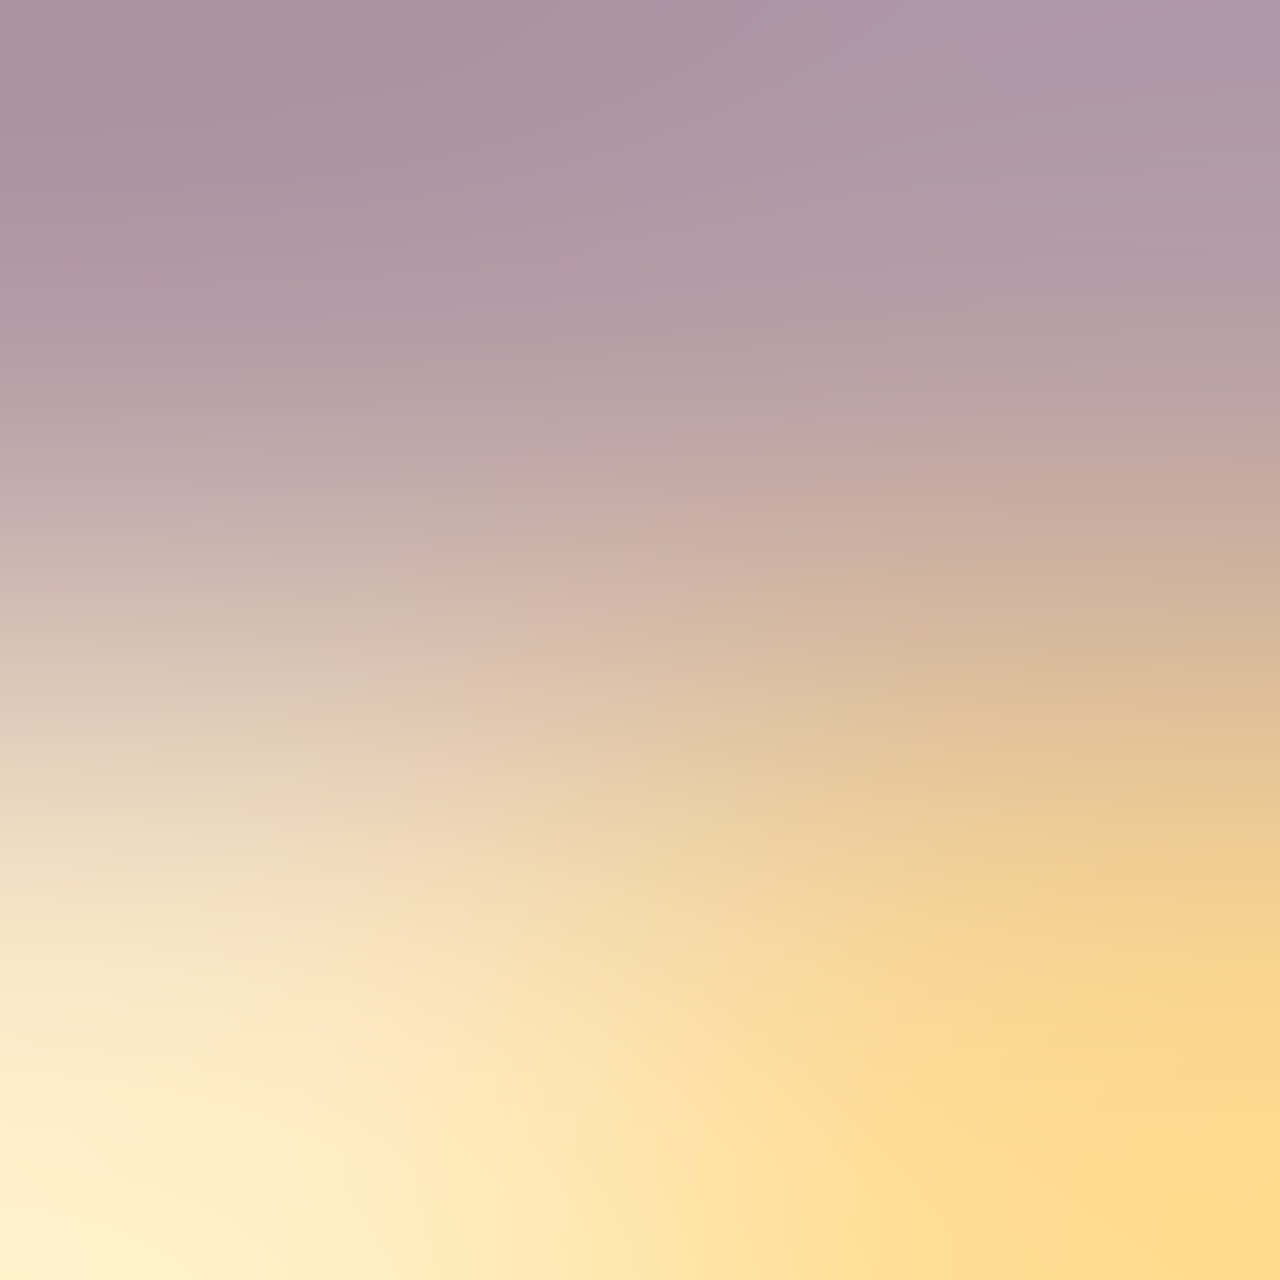 Pastel Gradient Background Brown And Yellow